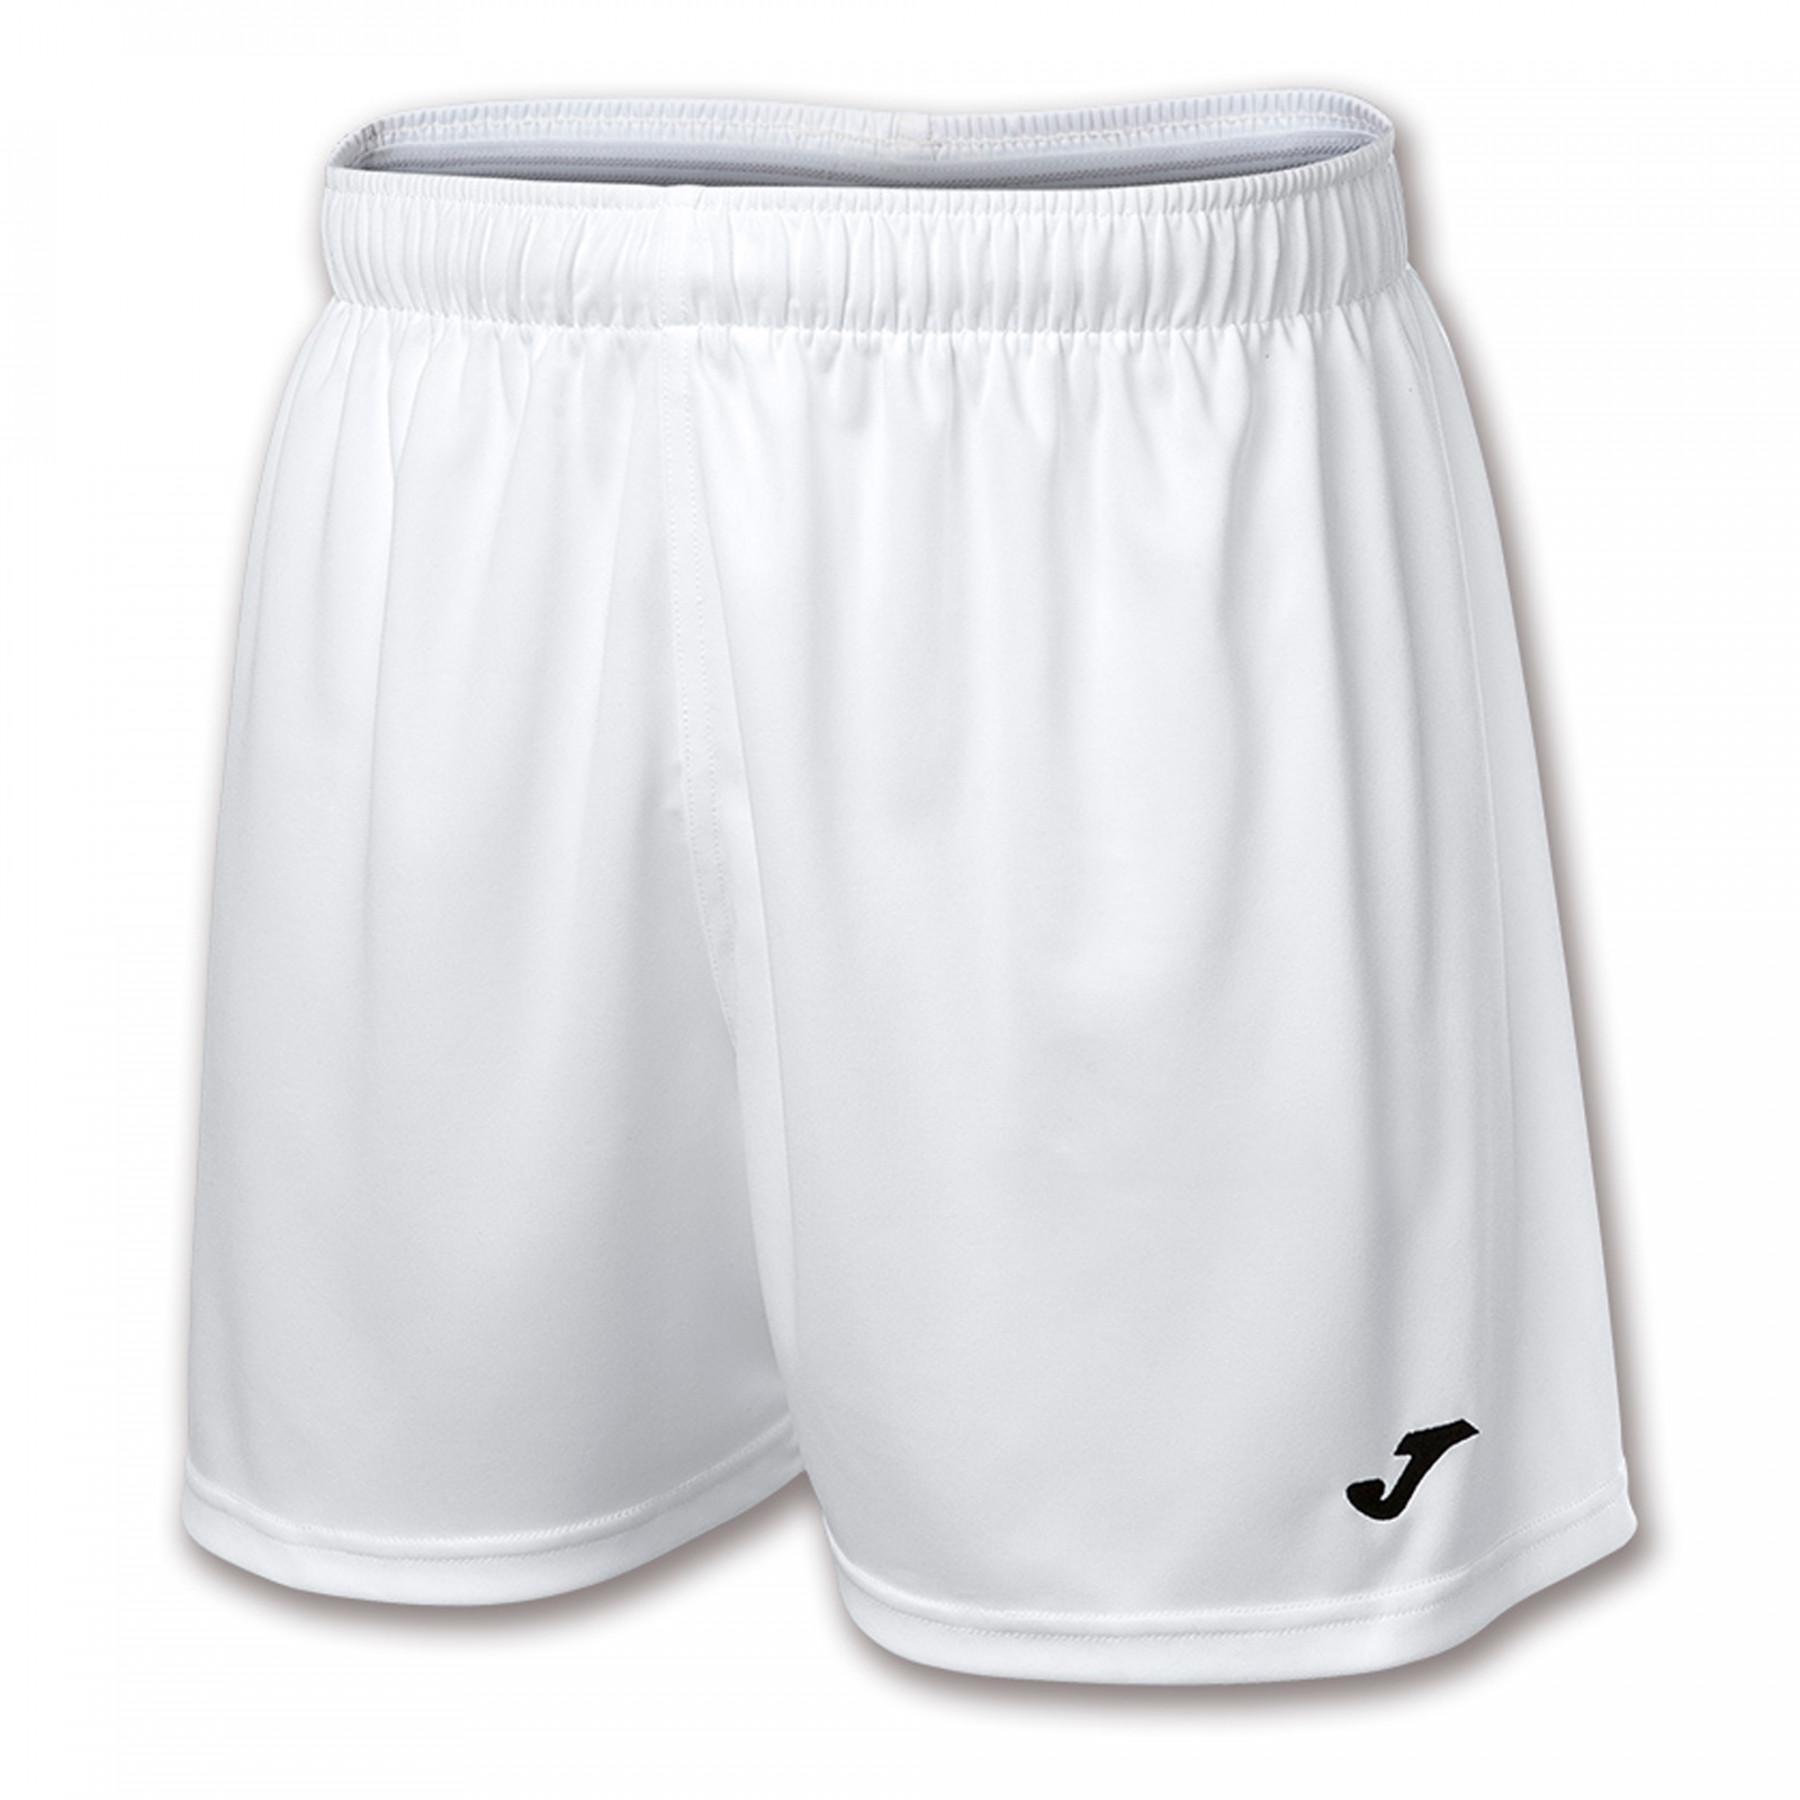 Junior Shorts Joma Prorugby